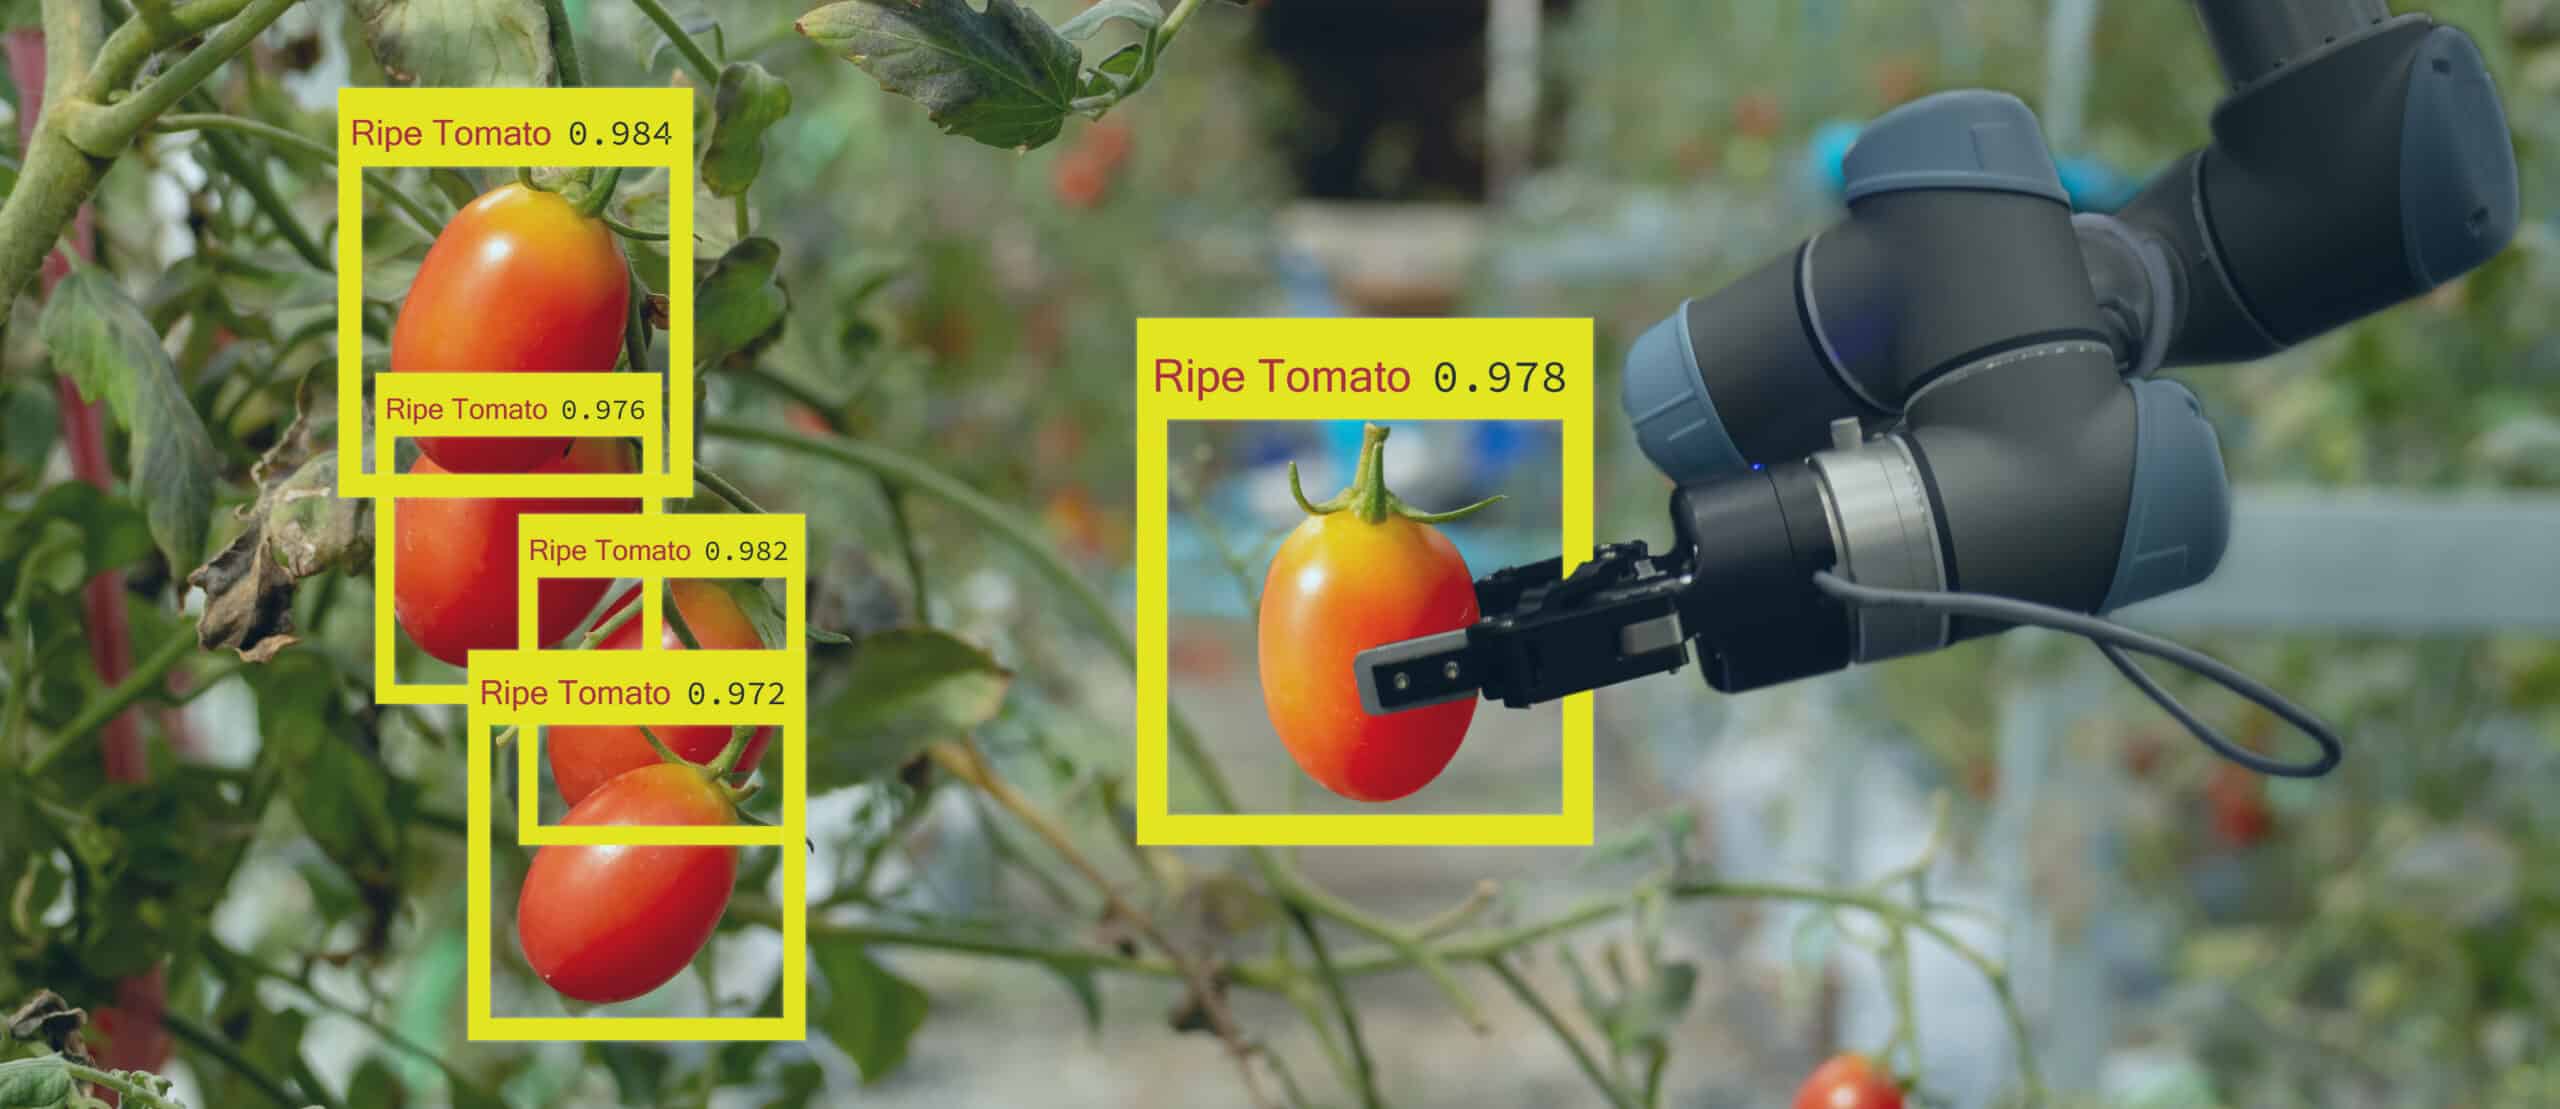 smart robotic in agriculture futuristic concept, robot farmers (automation) must be programmed to work to collect vegetable and fruit by using deep learning and object recognition technology